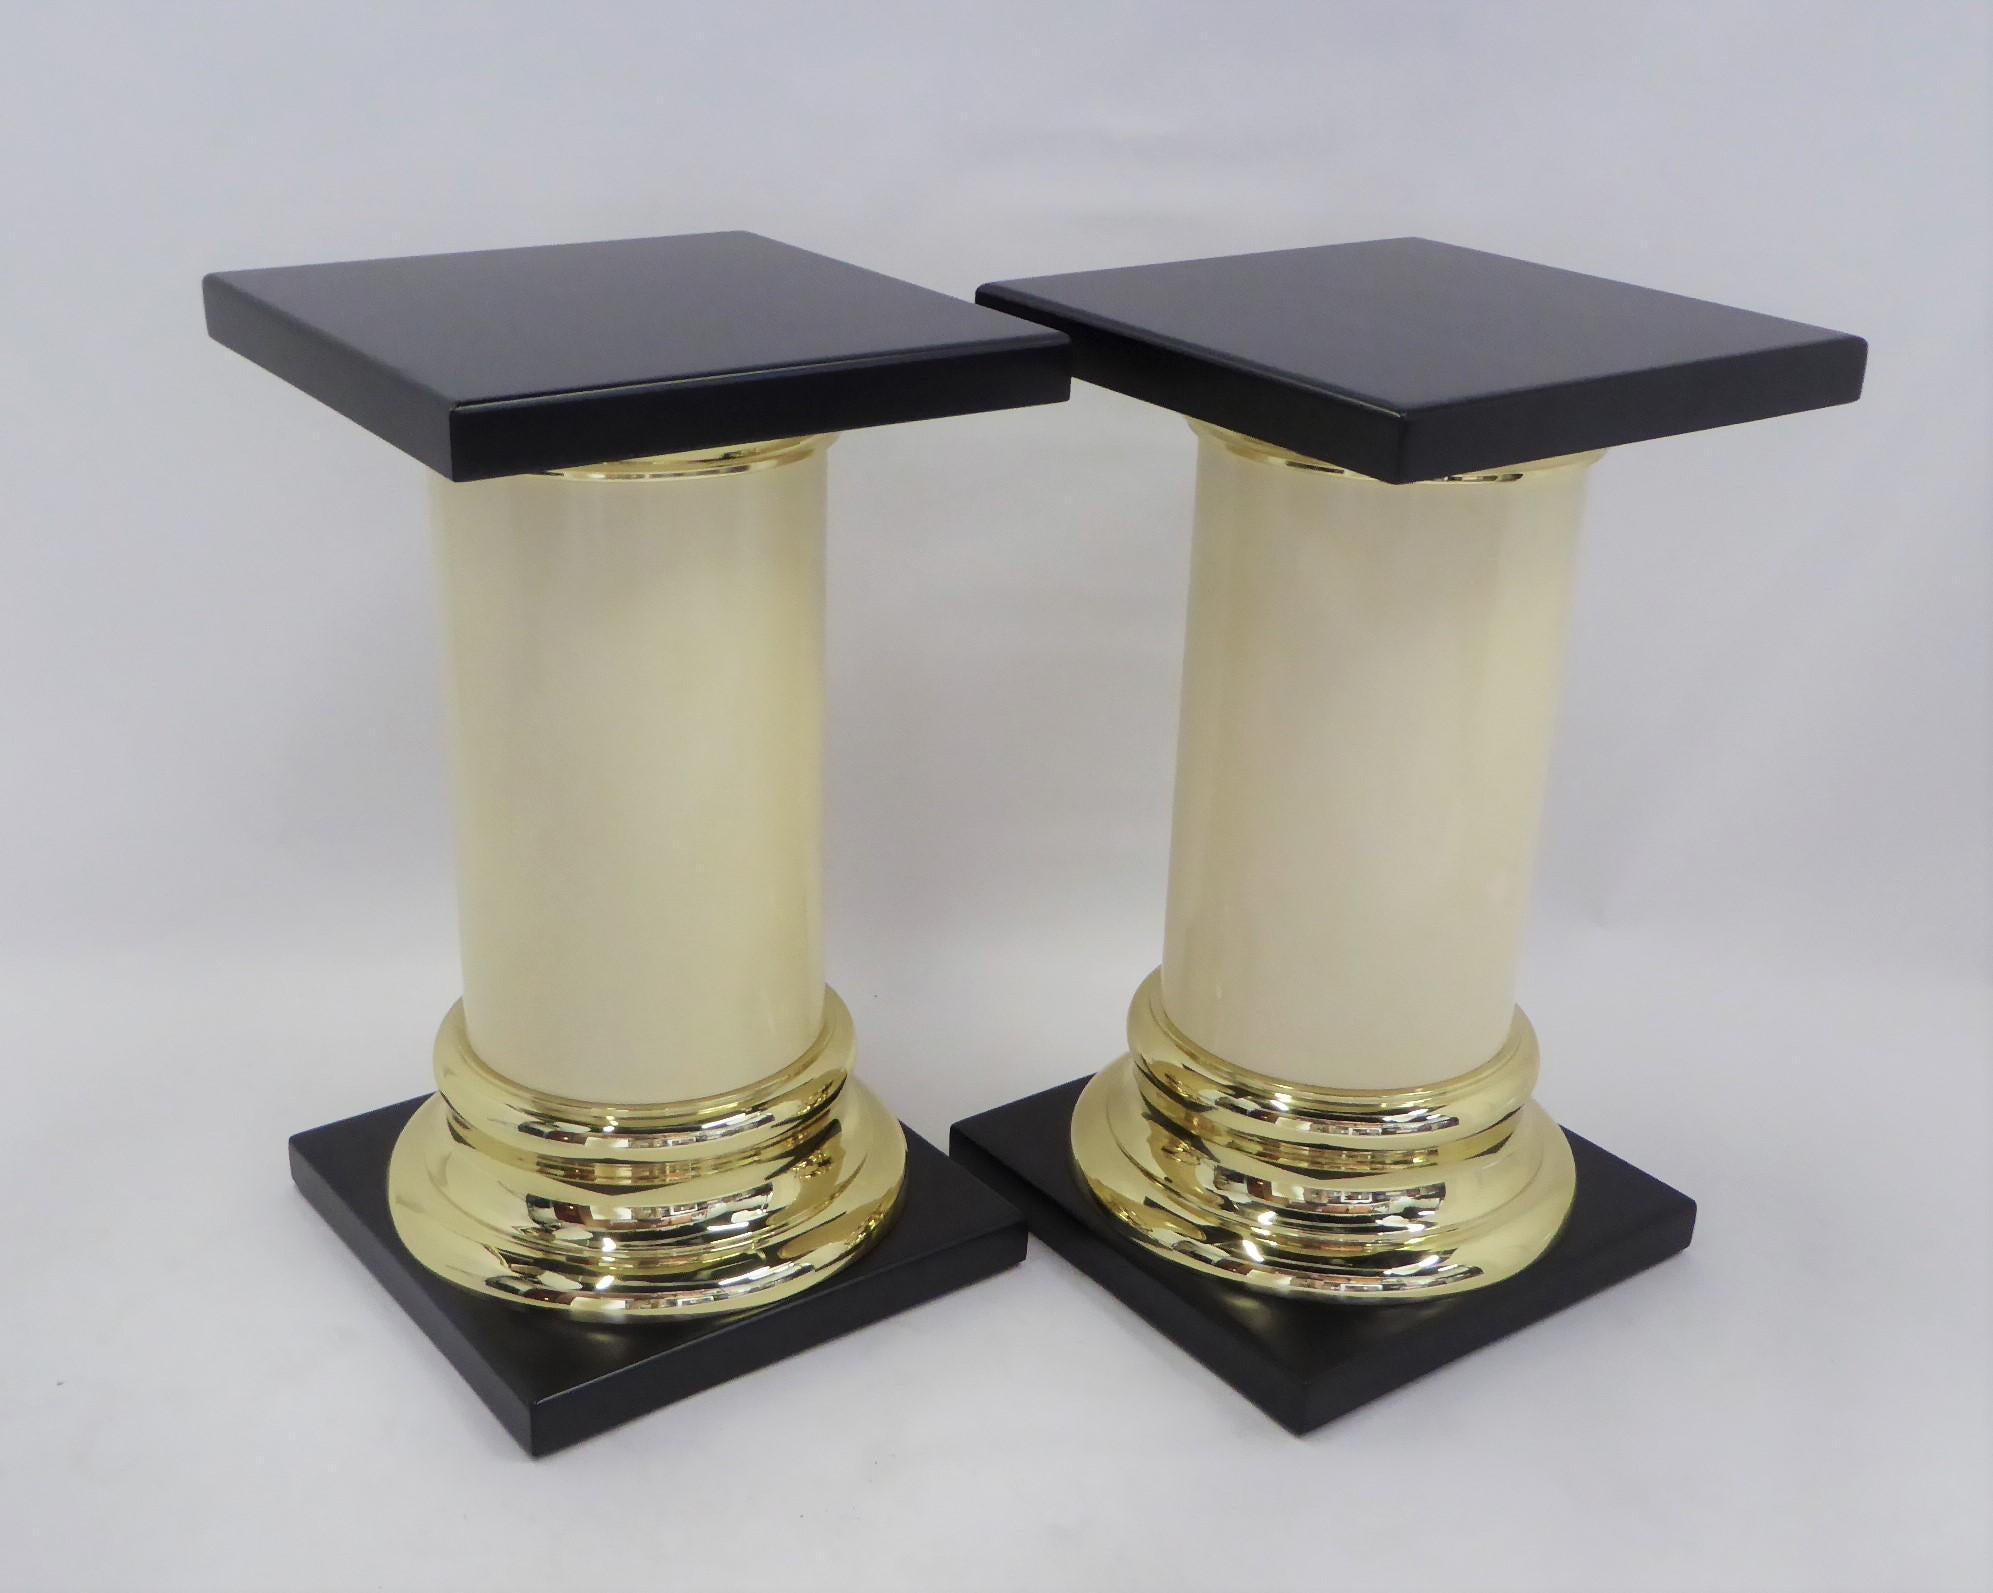 A Mid-Century Modern Mastercraft pedestal or side table with a simple Roman Tuscan column design in the manner of Karl Springer. Featuring a smooth cylindrical ivory colored resin (or ABS plastic) shaft with solid brass capital and base terminating